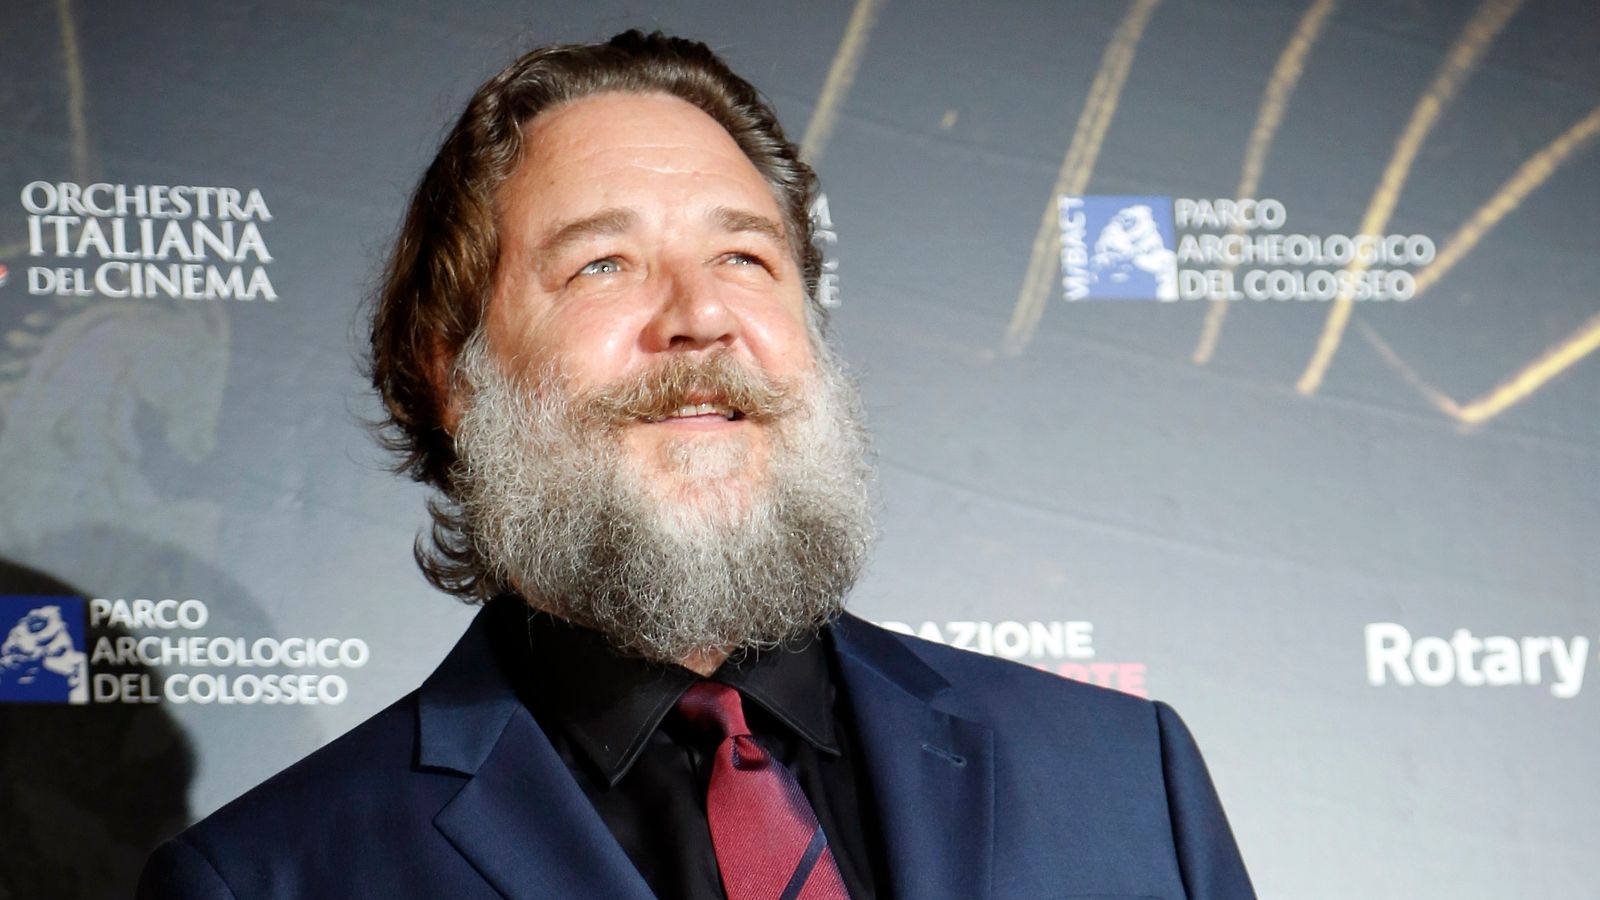 Russell Crowe to play Zeus in Marvel film Thor: Love and Thunder